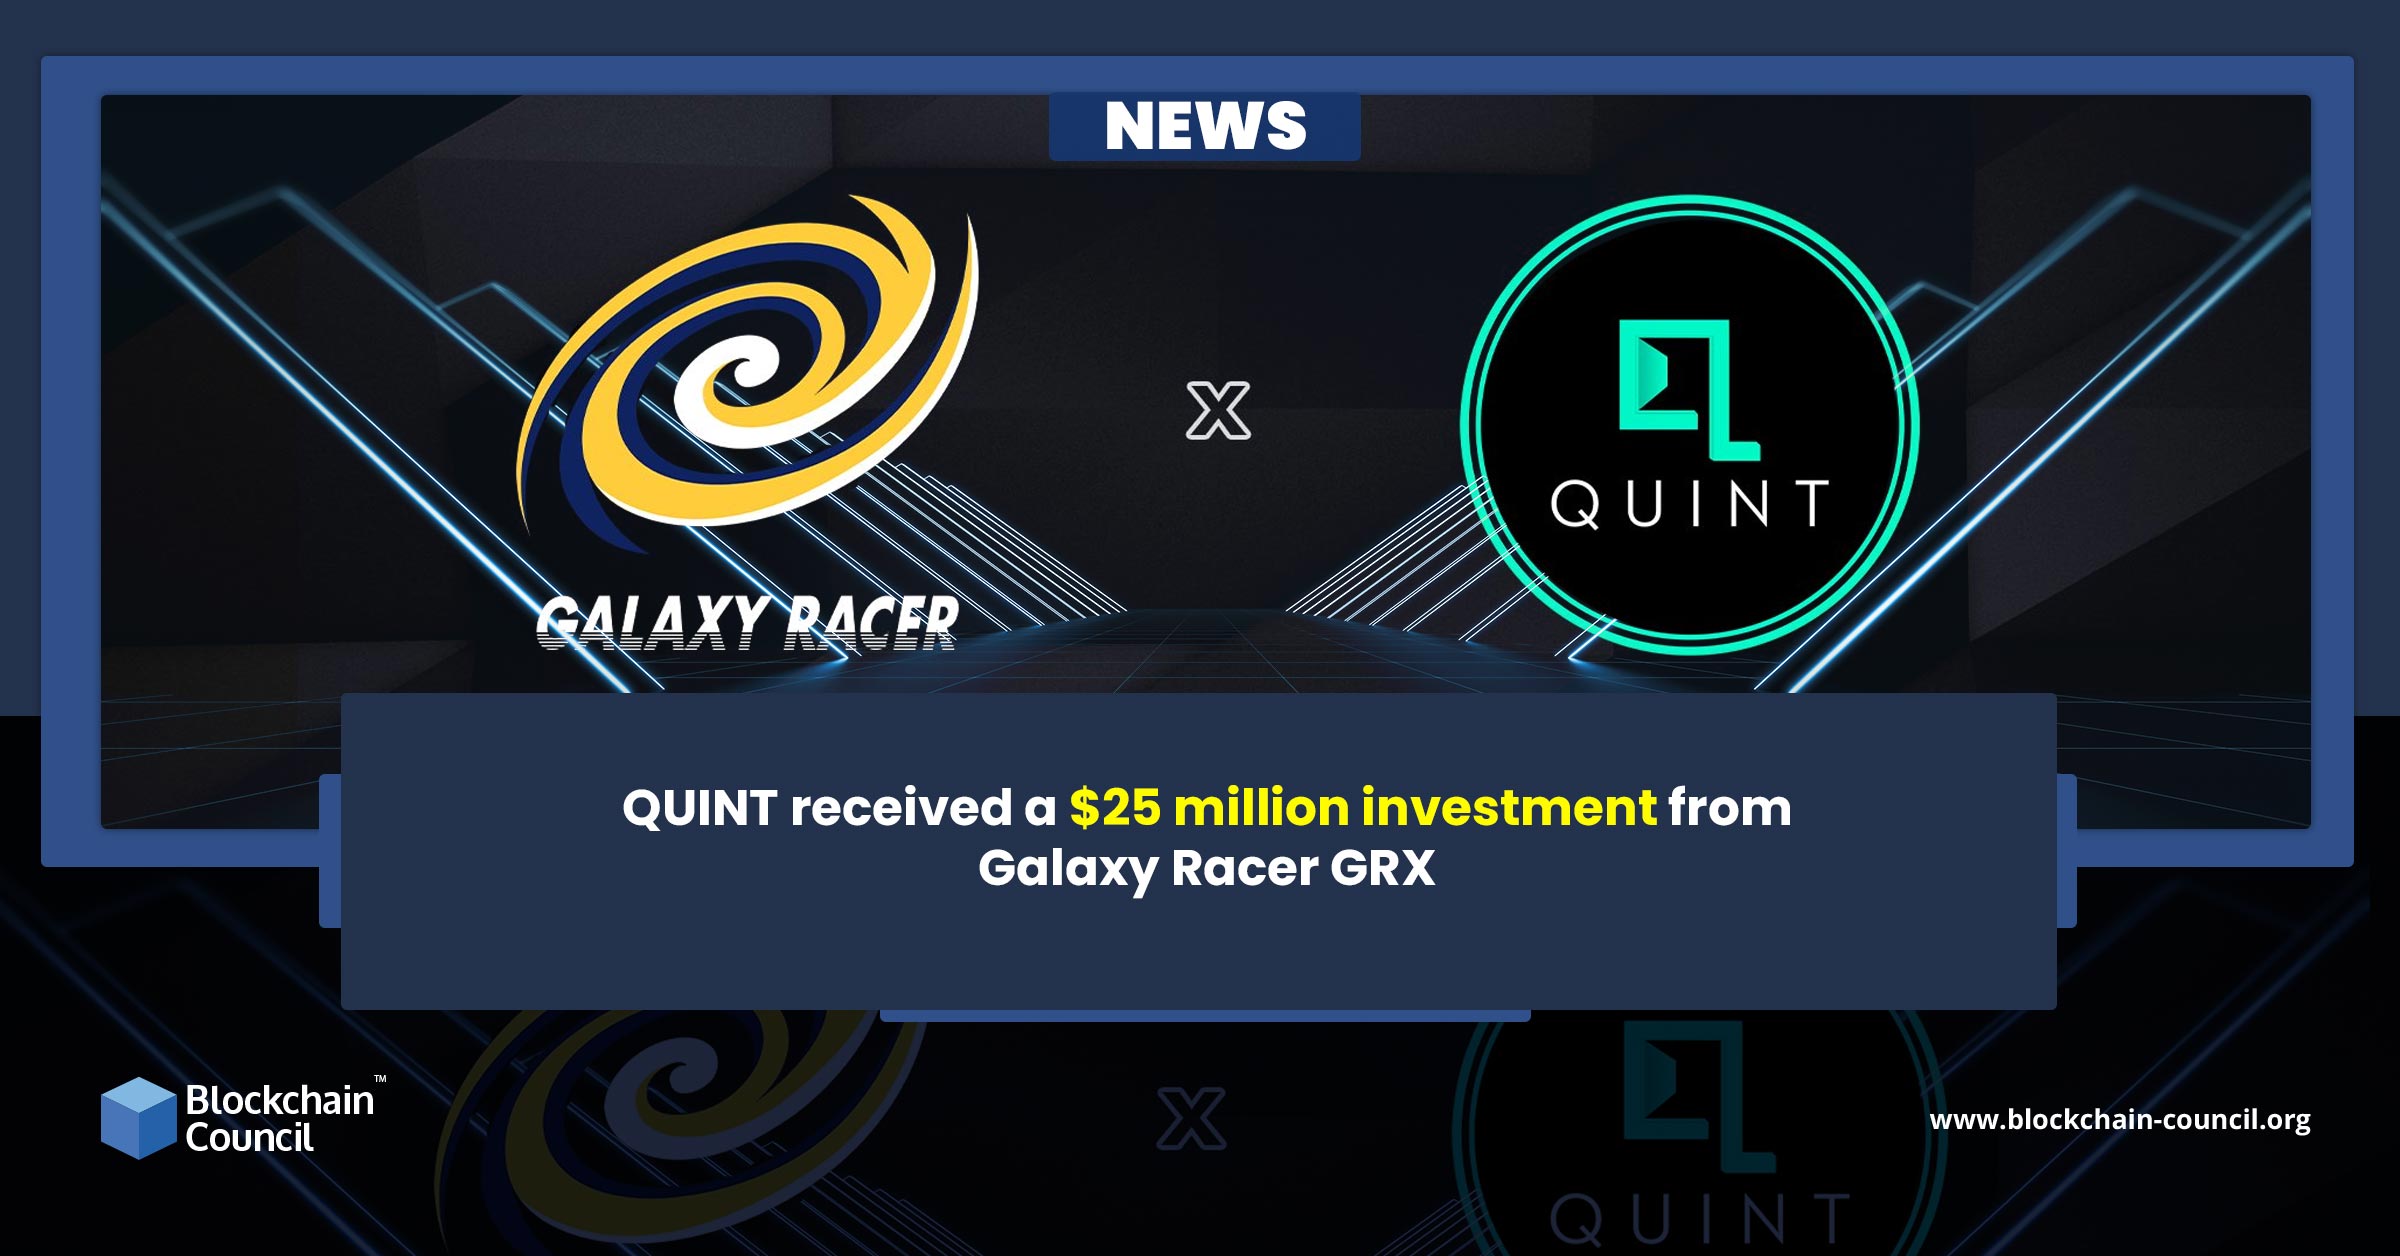 QUINT received a $25 million investment from Galaxy Racer GRX